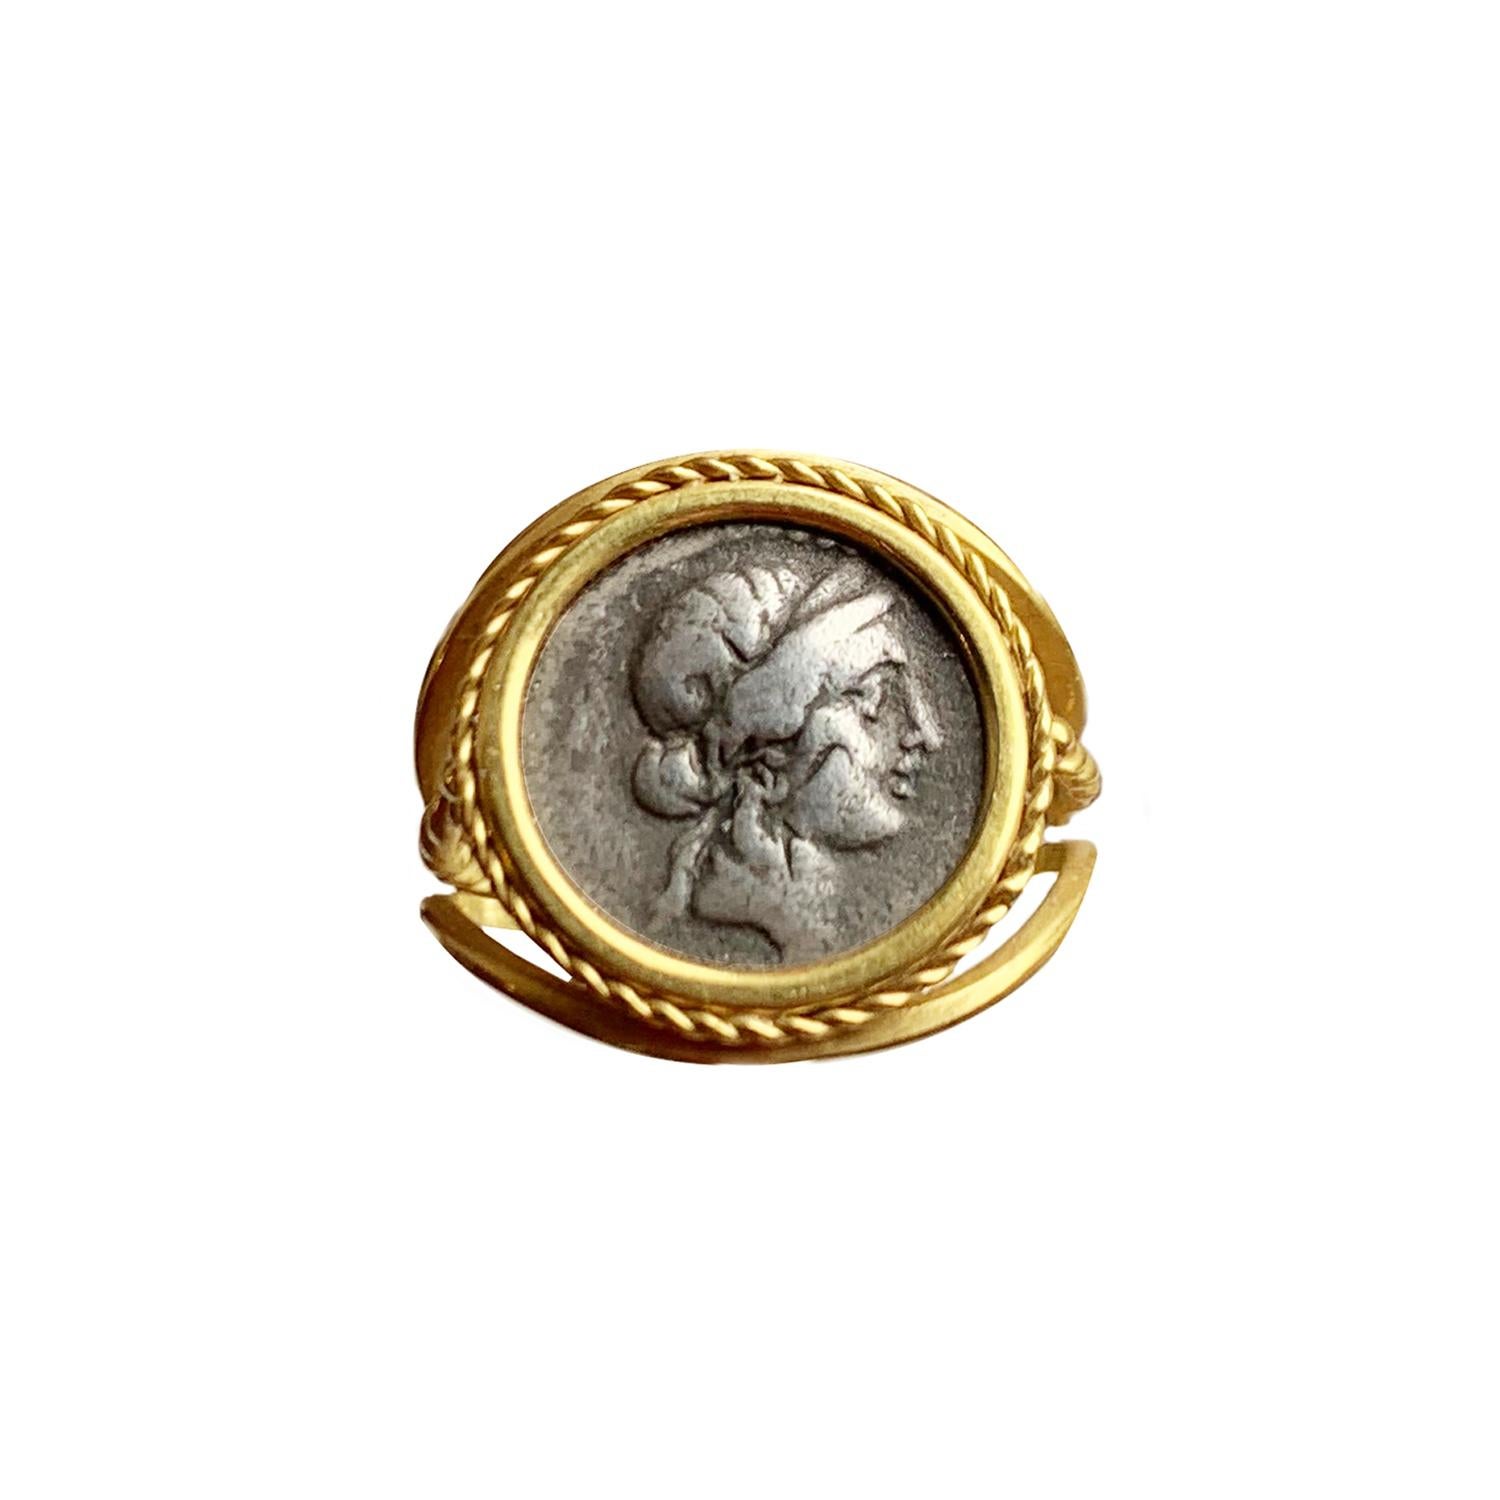 In this 18 Kt gold ring there is an authentic roman coin (silver denarius-1st century B.C. ) depicting the diademed head of Venus.
In reverse side of the coin there is Aeneas walking, carrying Anchise ( his father ) and Palladium.
Venus  is a Roman